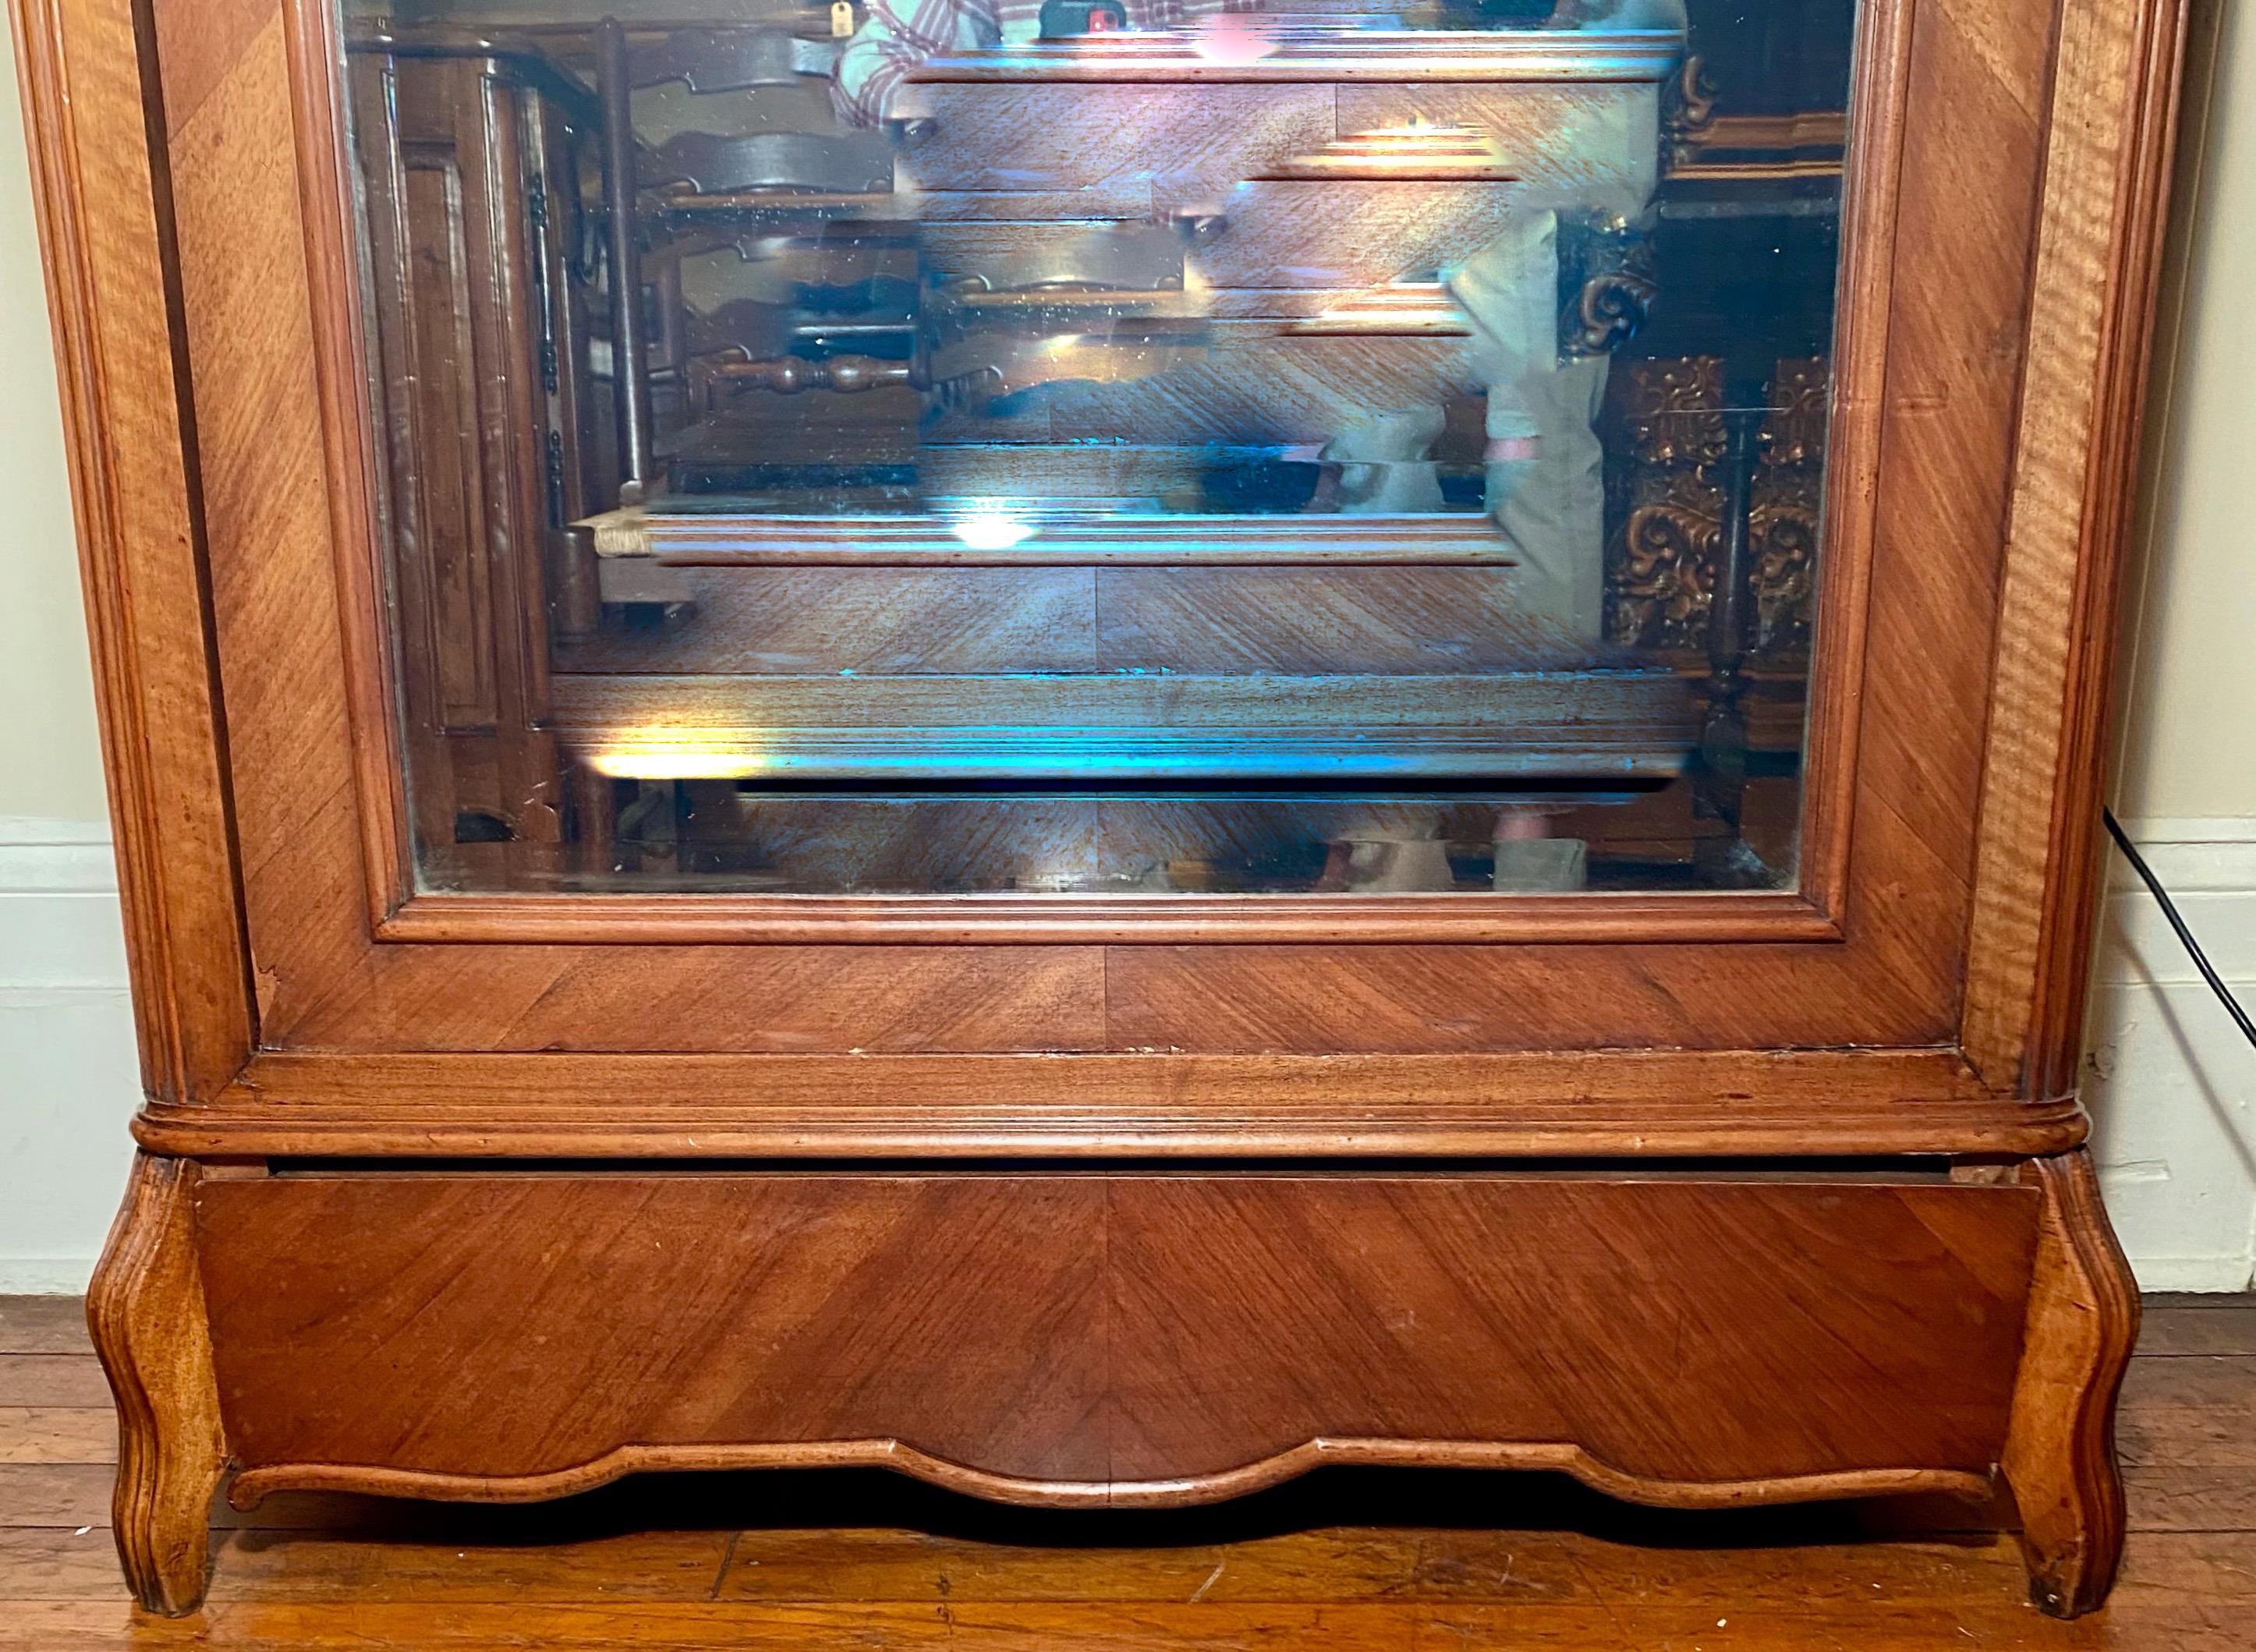 antique armoire with mirror